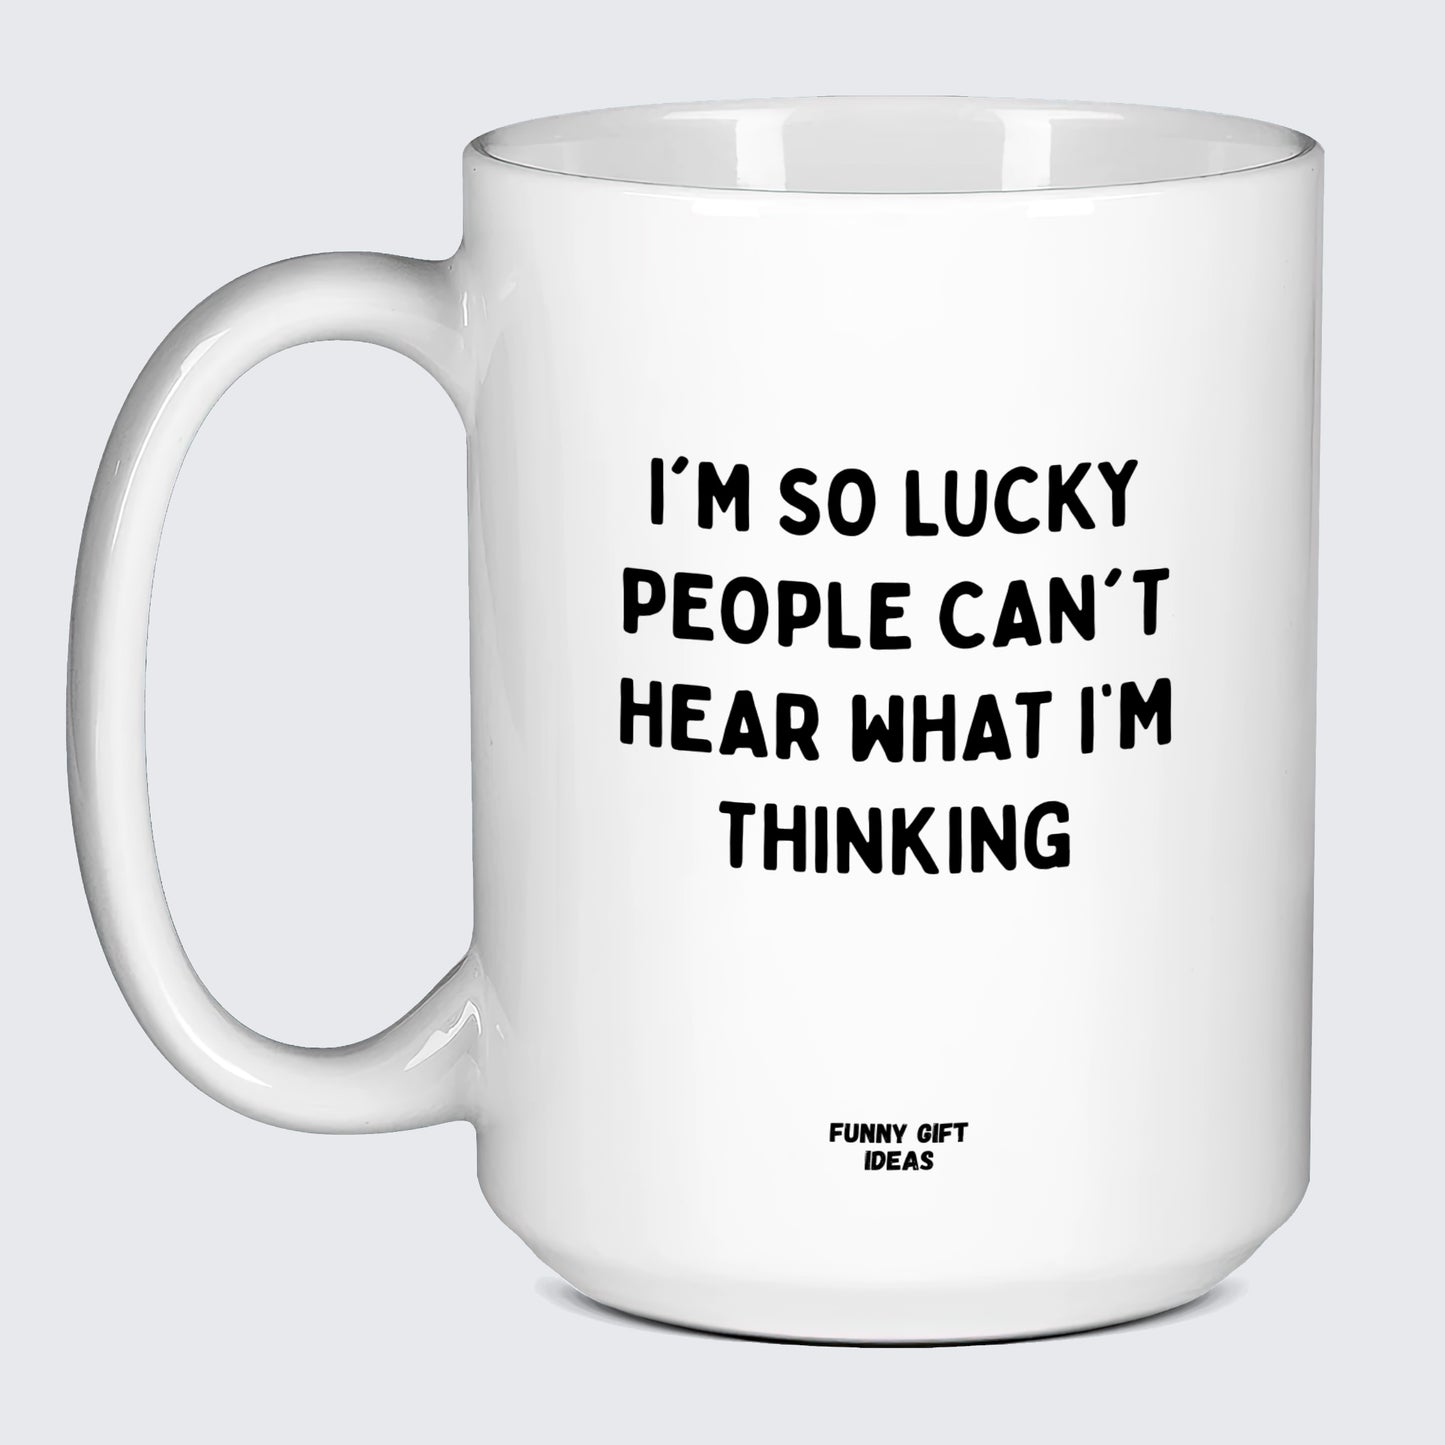 Cool Mugs I'm So Lucky People Can't Hear What I'm Thinking - Funny Gift Ideas